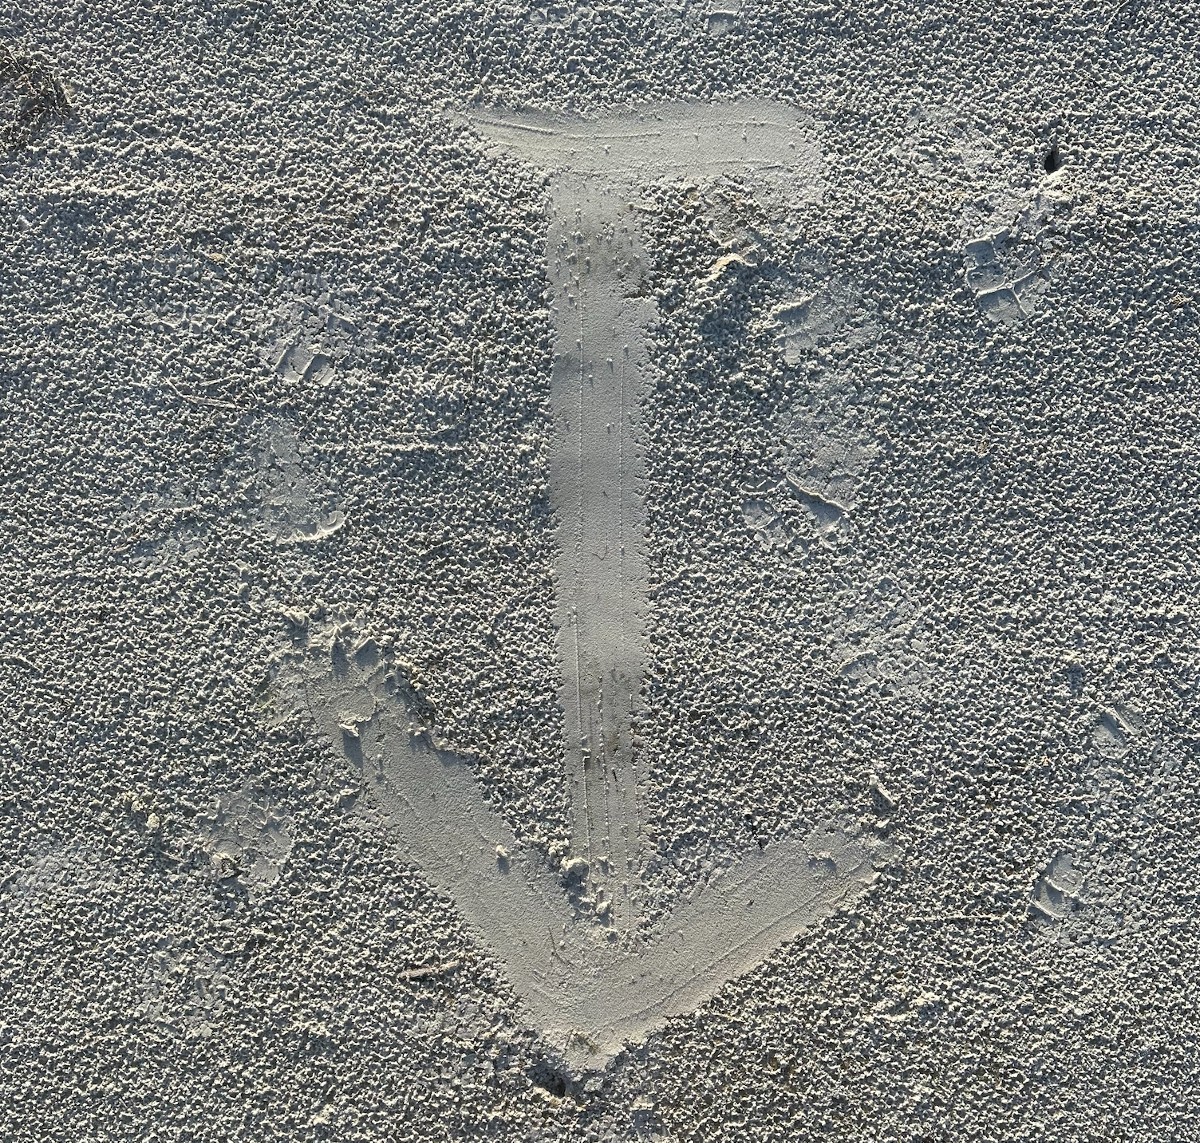 A simple sign in sand can provide direction